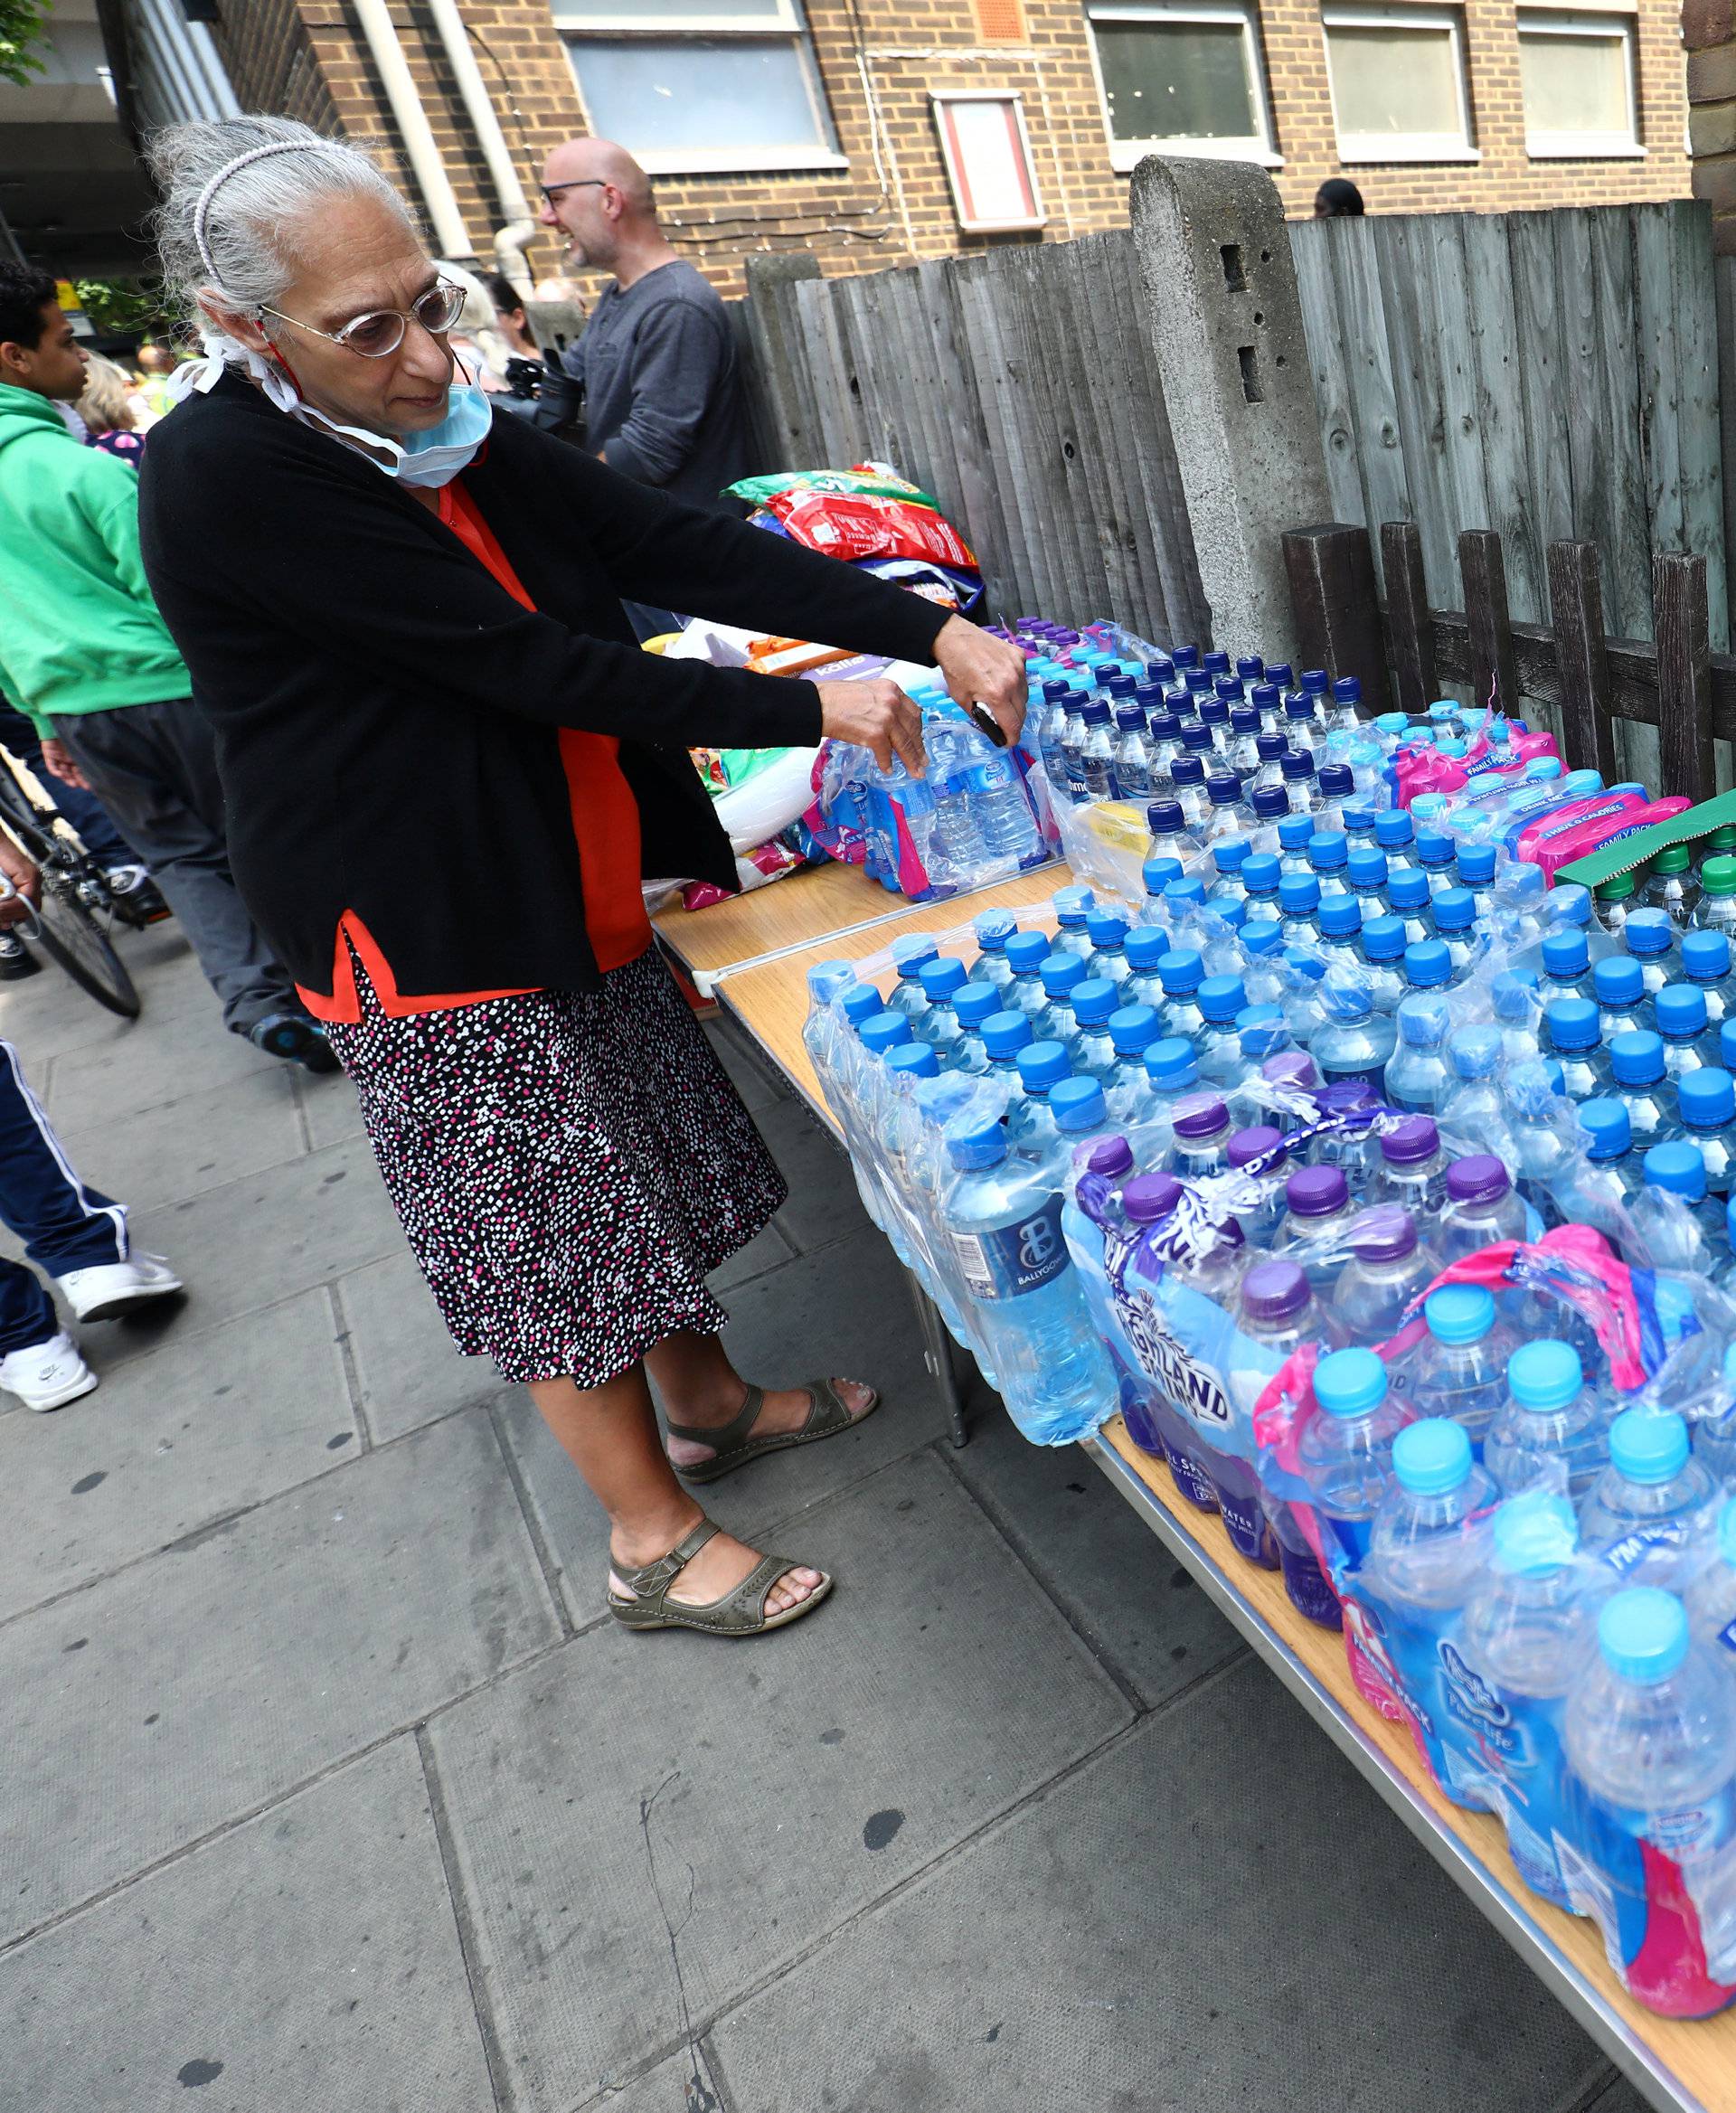 Water and other drinks are laid out near a tower block severely damaged by a serious fire, in north Kensington, West London